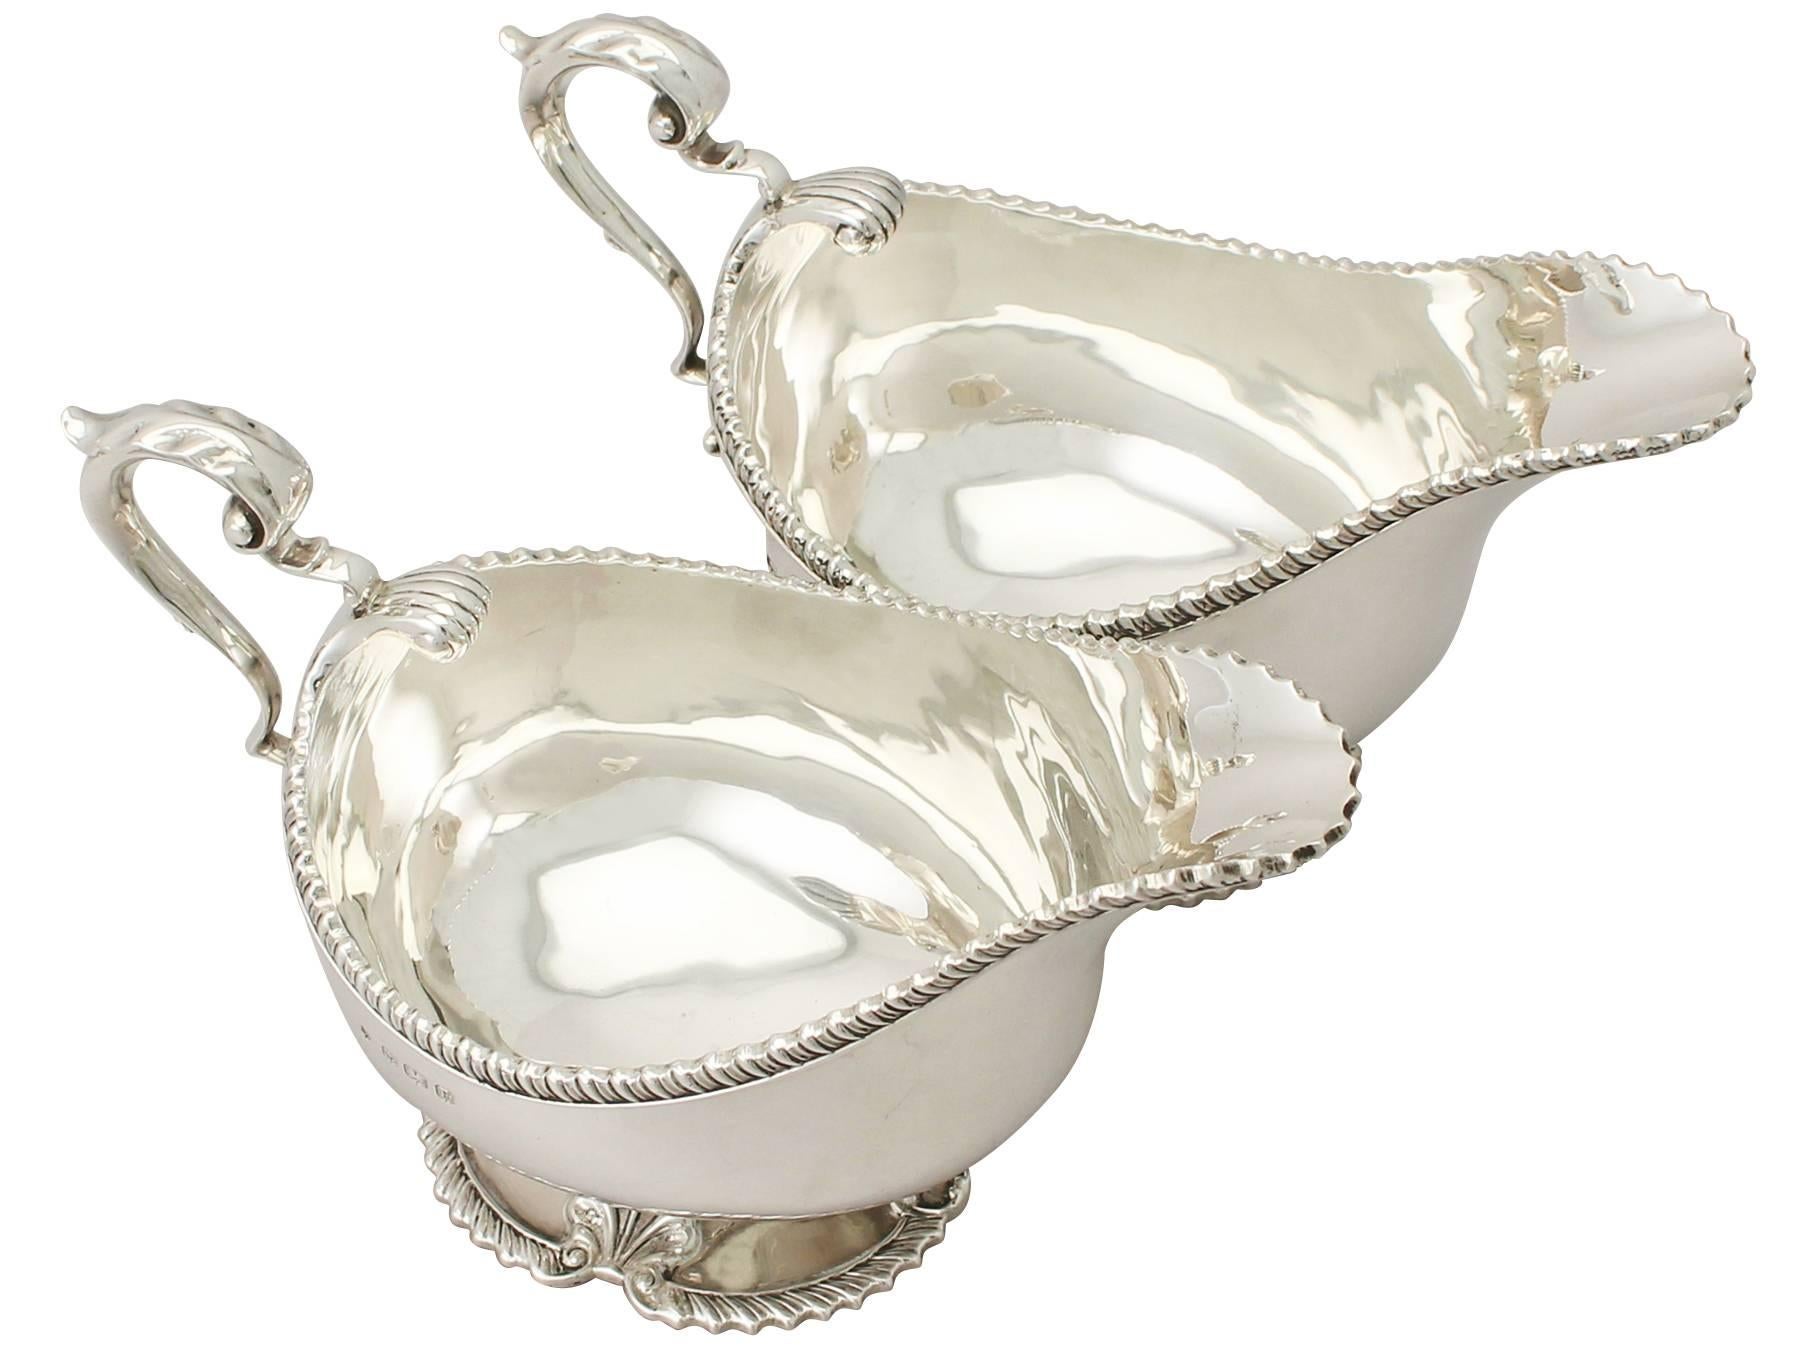 An exceptional, fine and impressive pair of antique George V sterling silver Regency style sauceboats; an addition to our dining silverware collection.

These exceptional antique George V sterling silver sauce boats have a plain oval rounded form